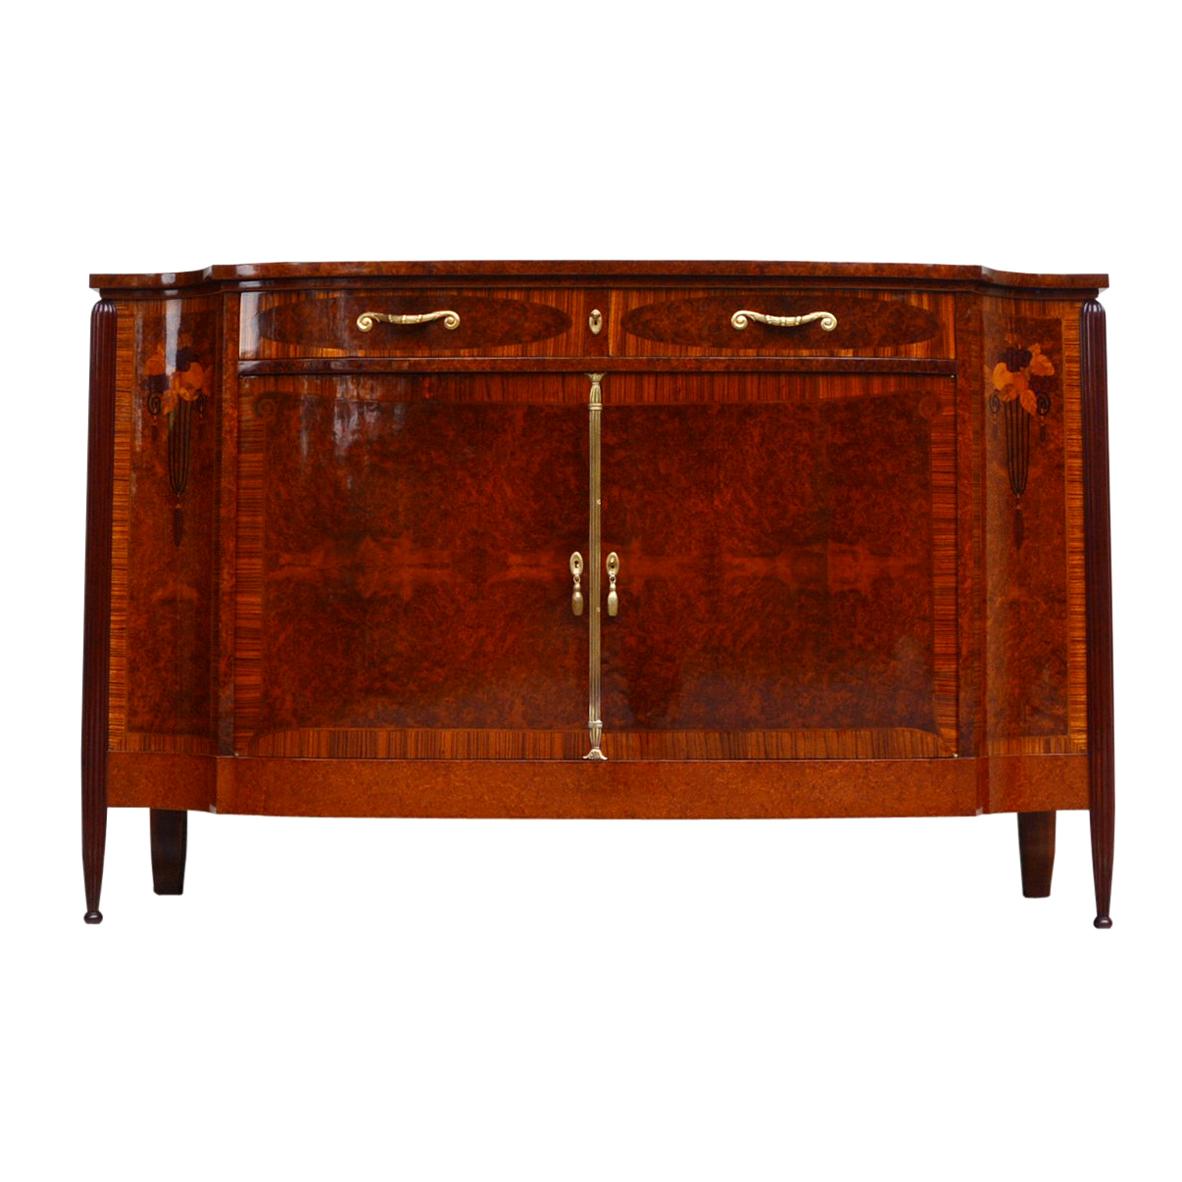 Attributed to Paul Follot, Art Deco Sideboard, Paris, 1920s